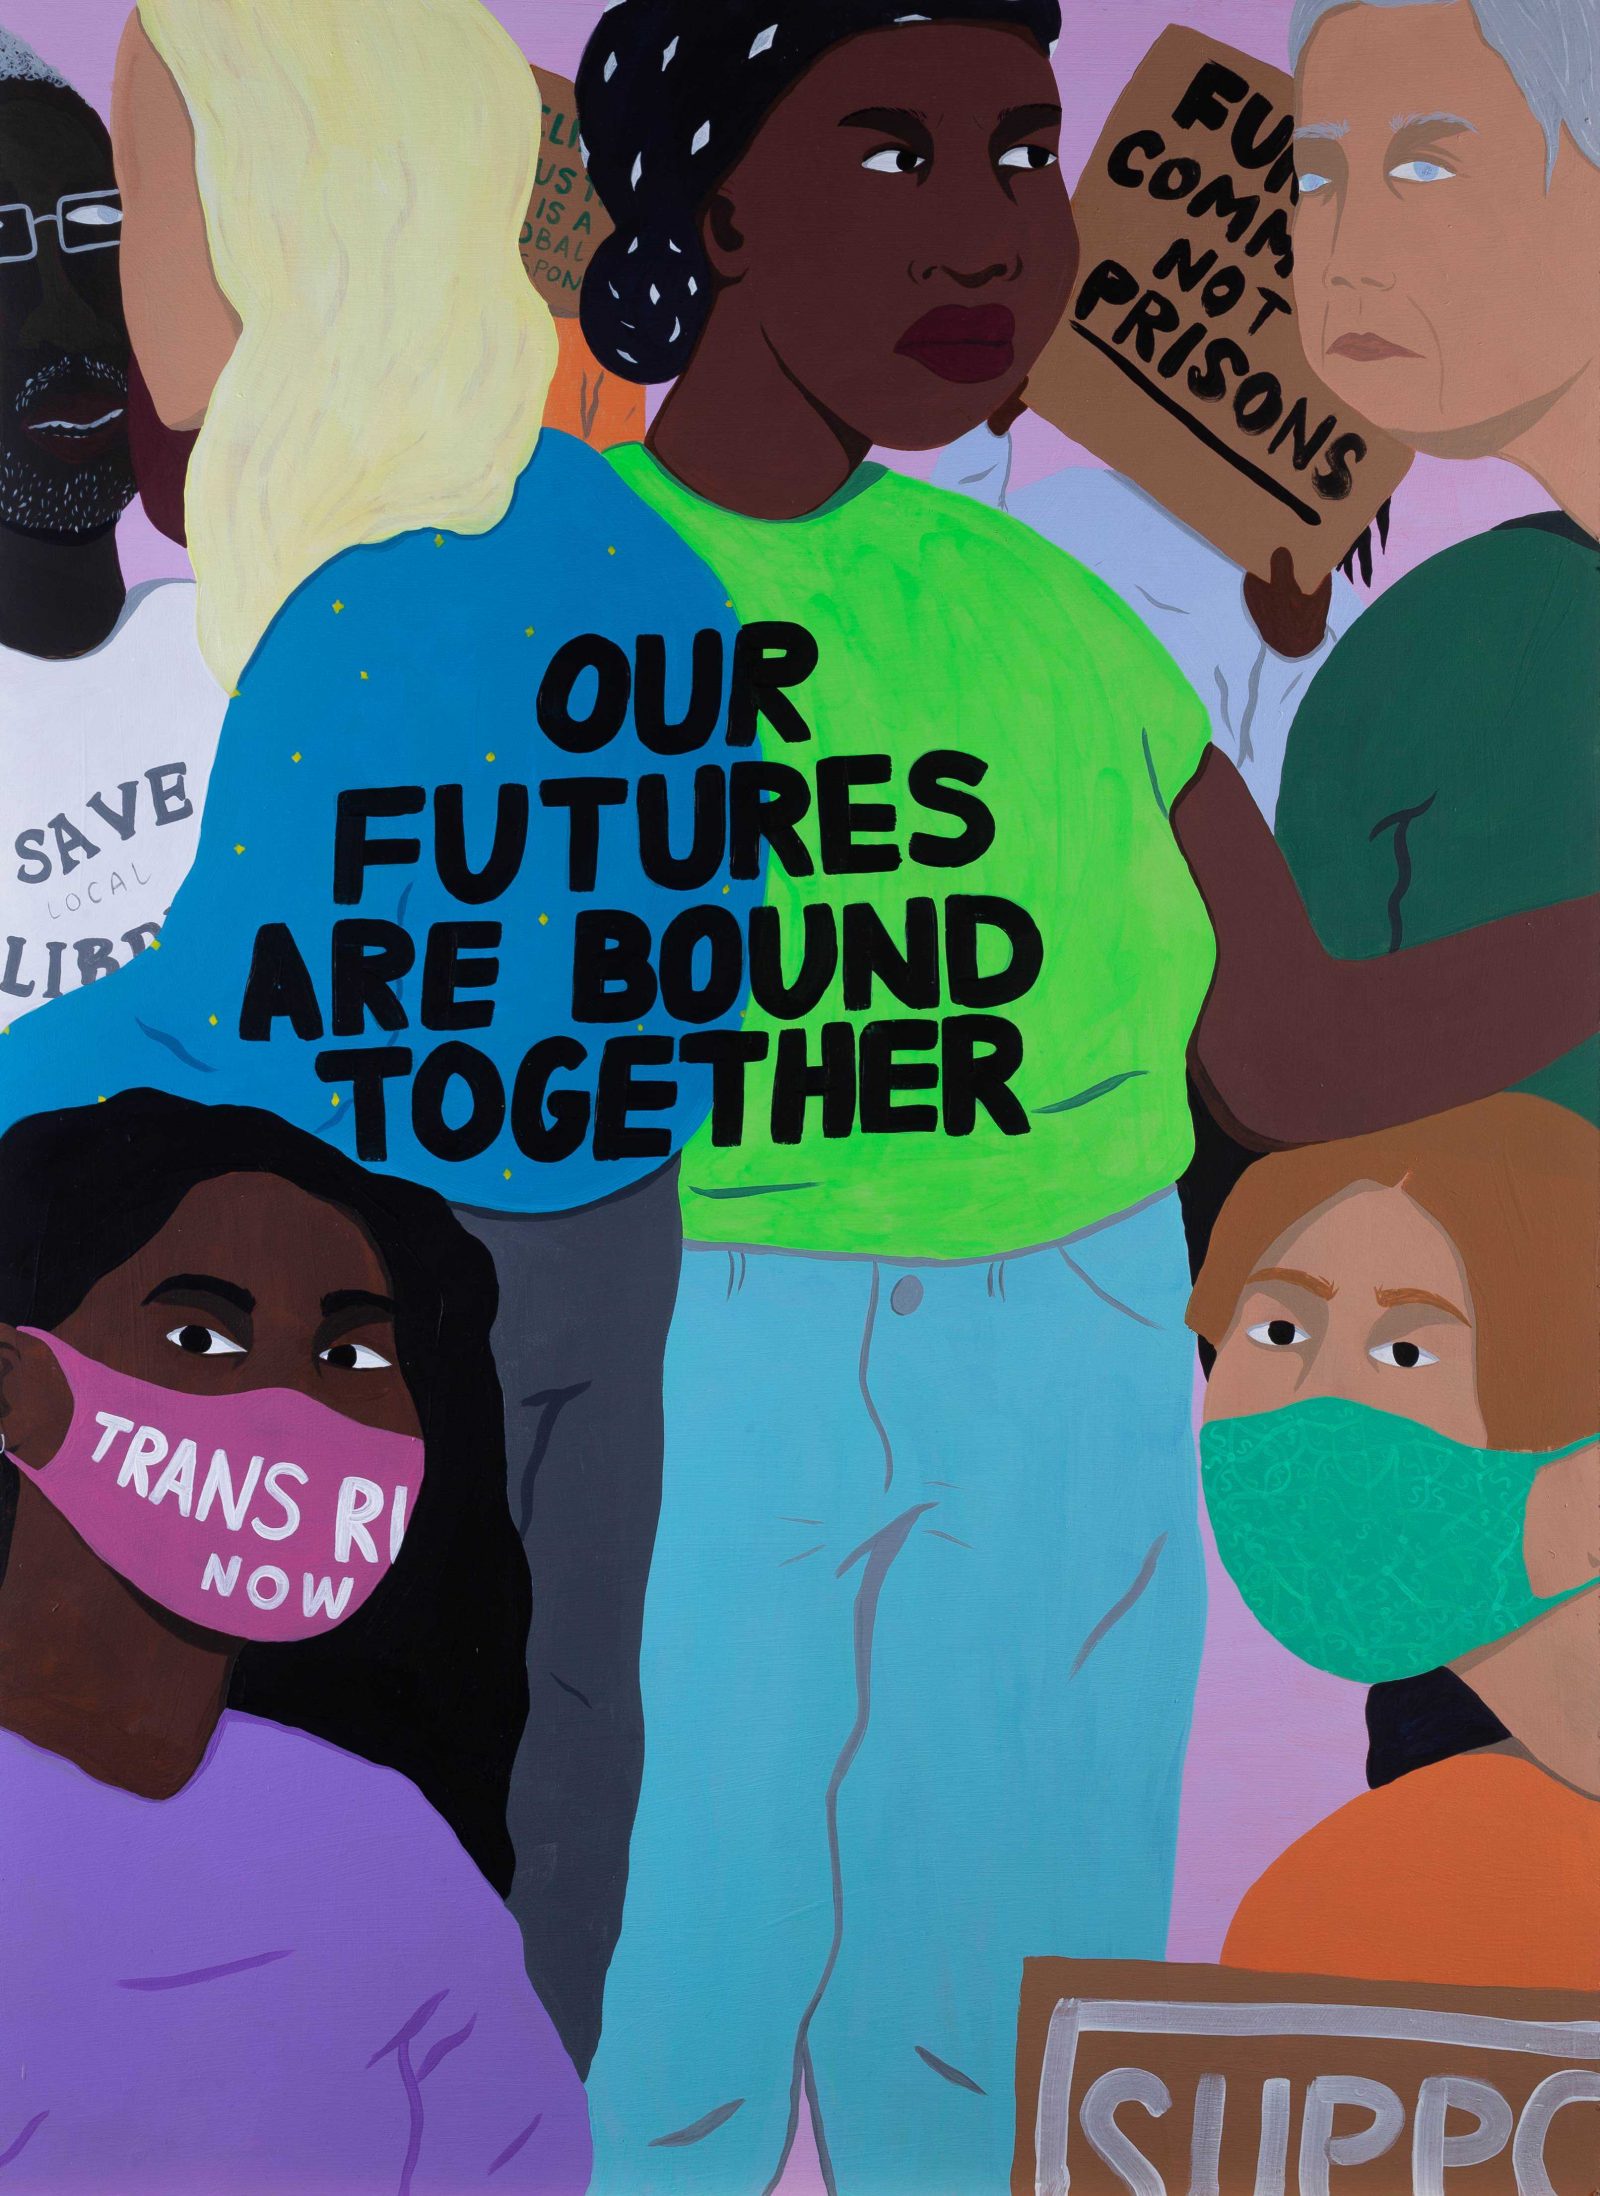 There is a crowd of people who are all different ages, race and genders. Some are holding placards like FUND COMMUNITIES NOT PRISONS. In the middle of the painting it says 'our futures are bound together'. There is a Black person in the front wearing a face mask that says TRANS RIGHTS NOW on it.